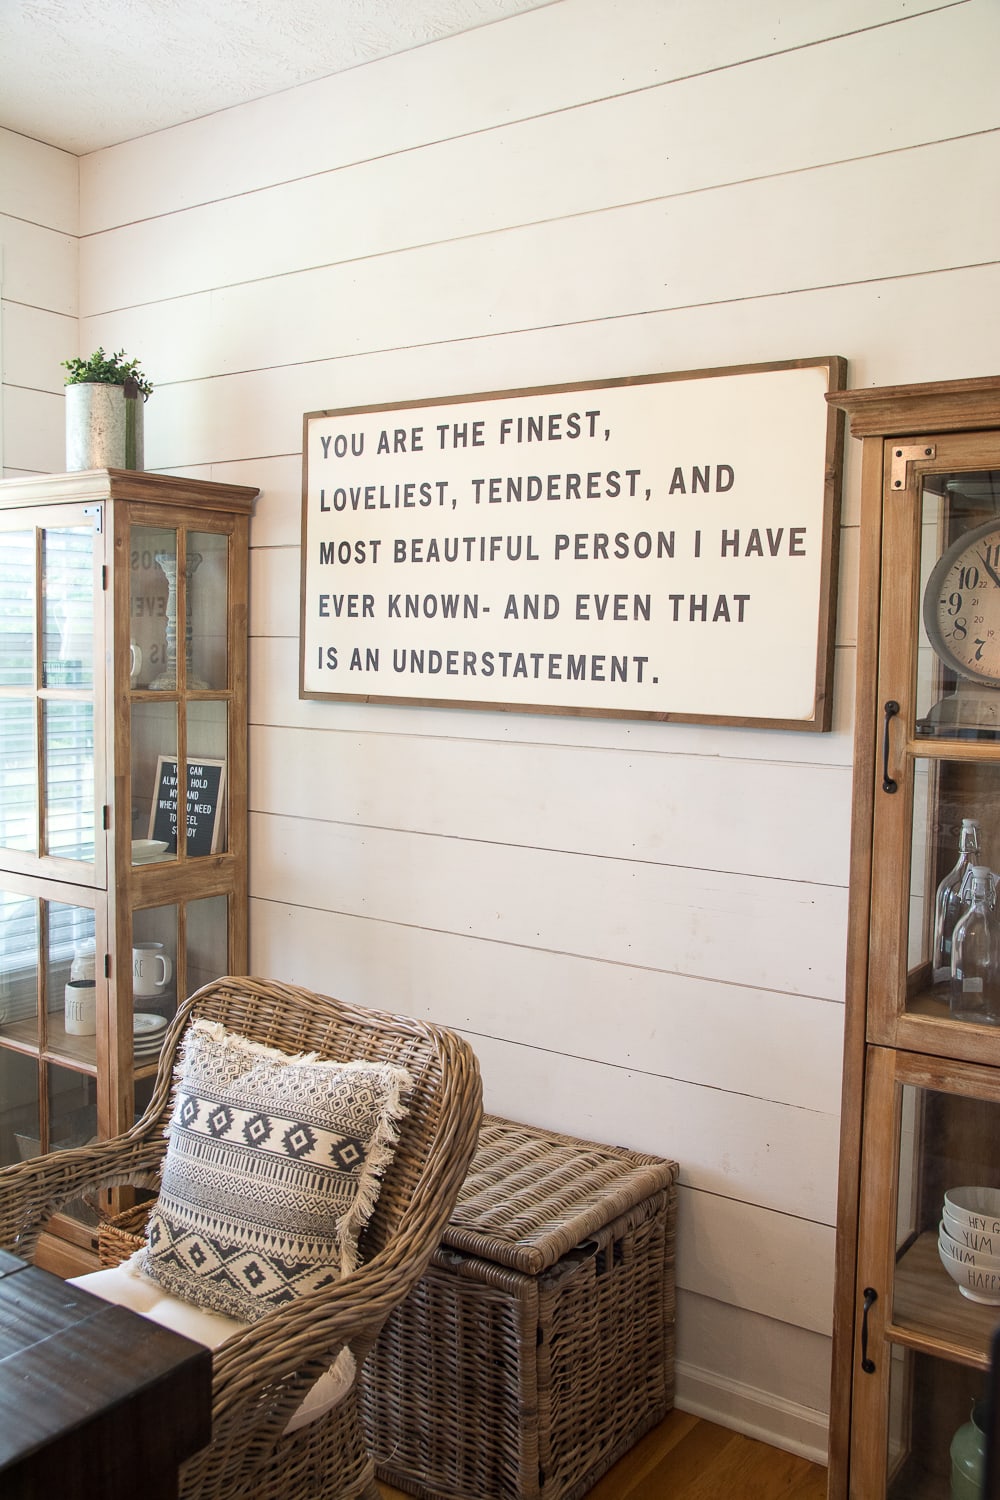 Easy Ways to add Farmhouse Style on a Budget! Affordable farmhouse decor perfect for creating the Fixer Upper look! 